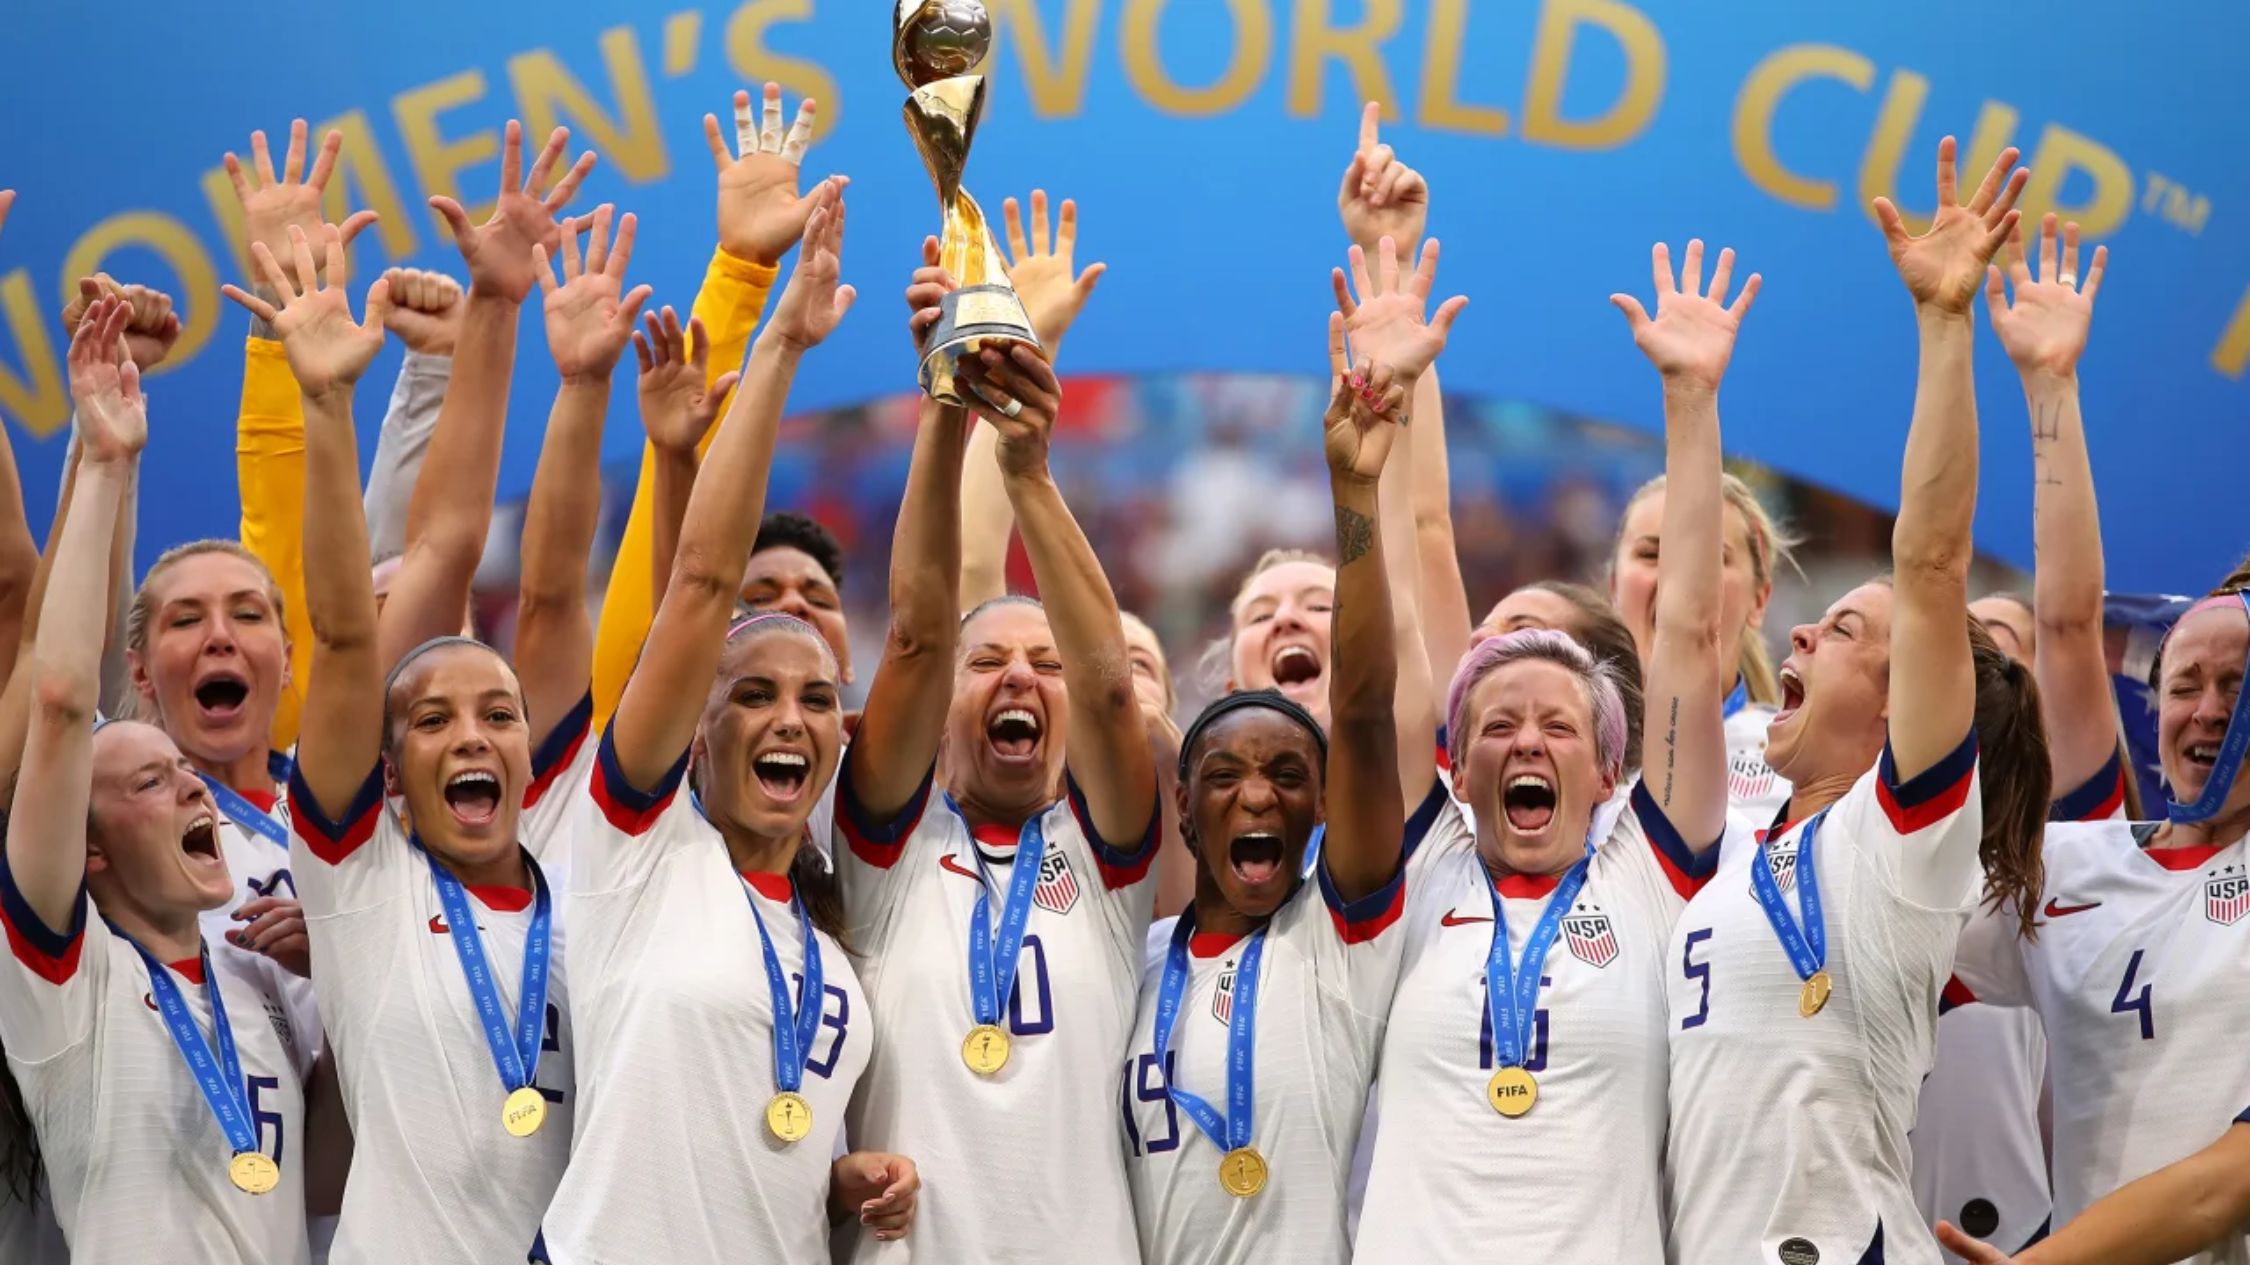 USWNT players celebrate defending their world title in 2019. (Photo: Richard Heathcote/Getty Images)